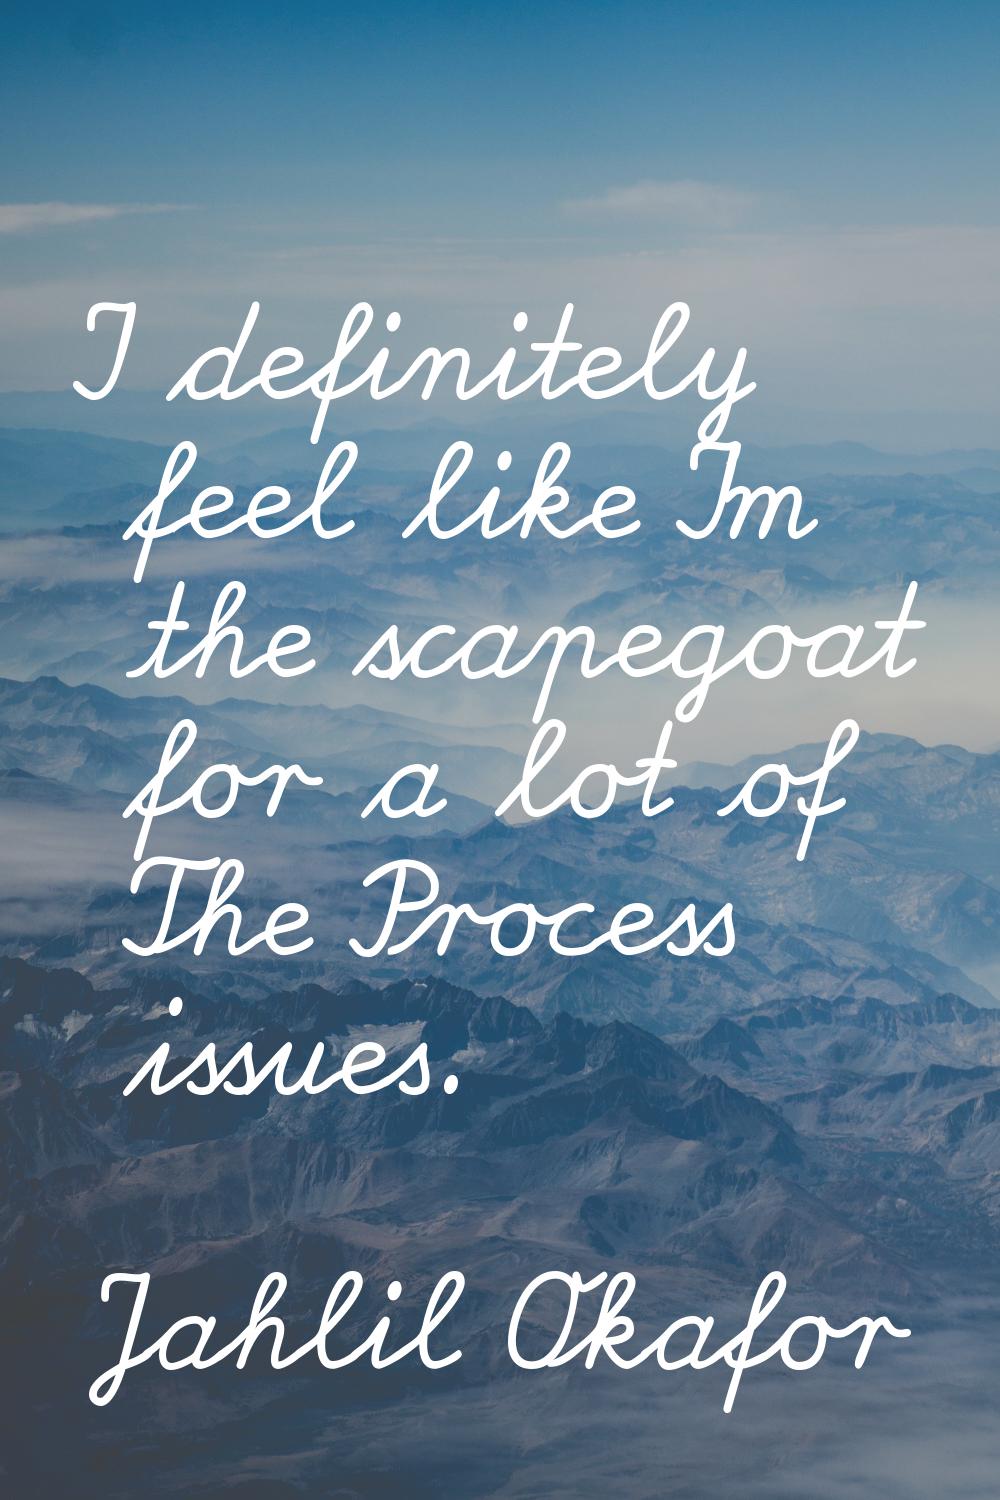 I definitely feel like I'm the scapegoat for a lot of The Process issues.